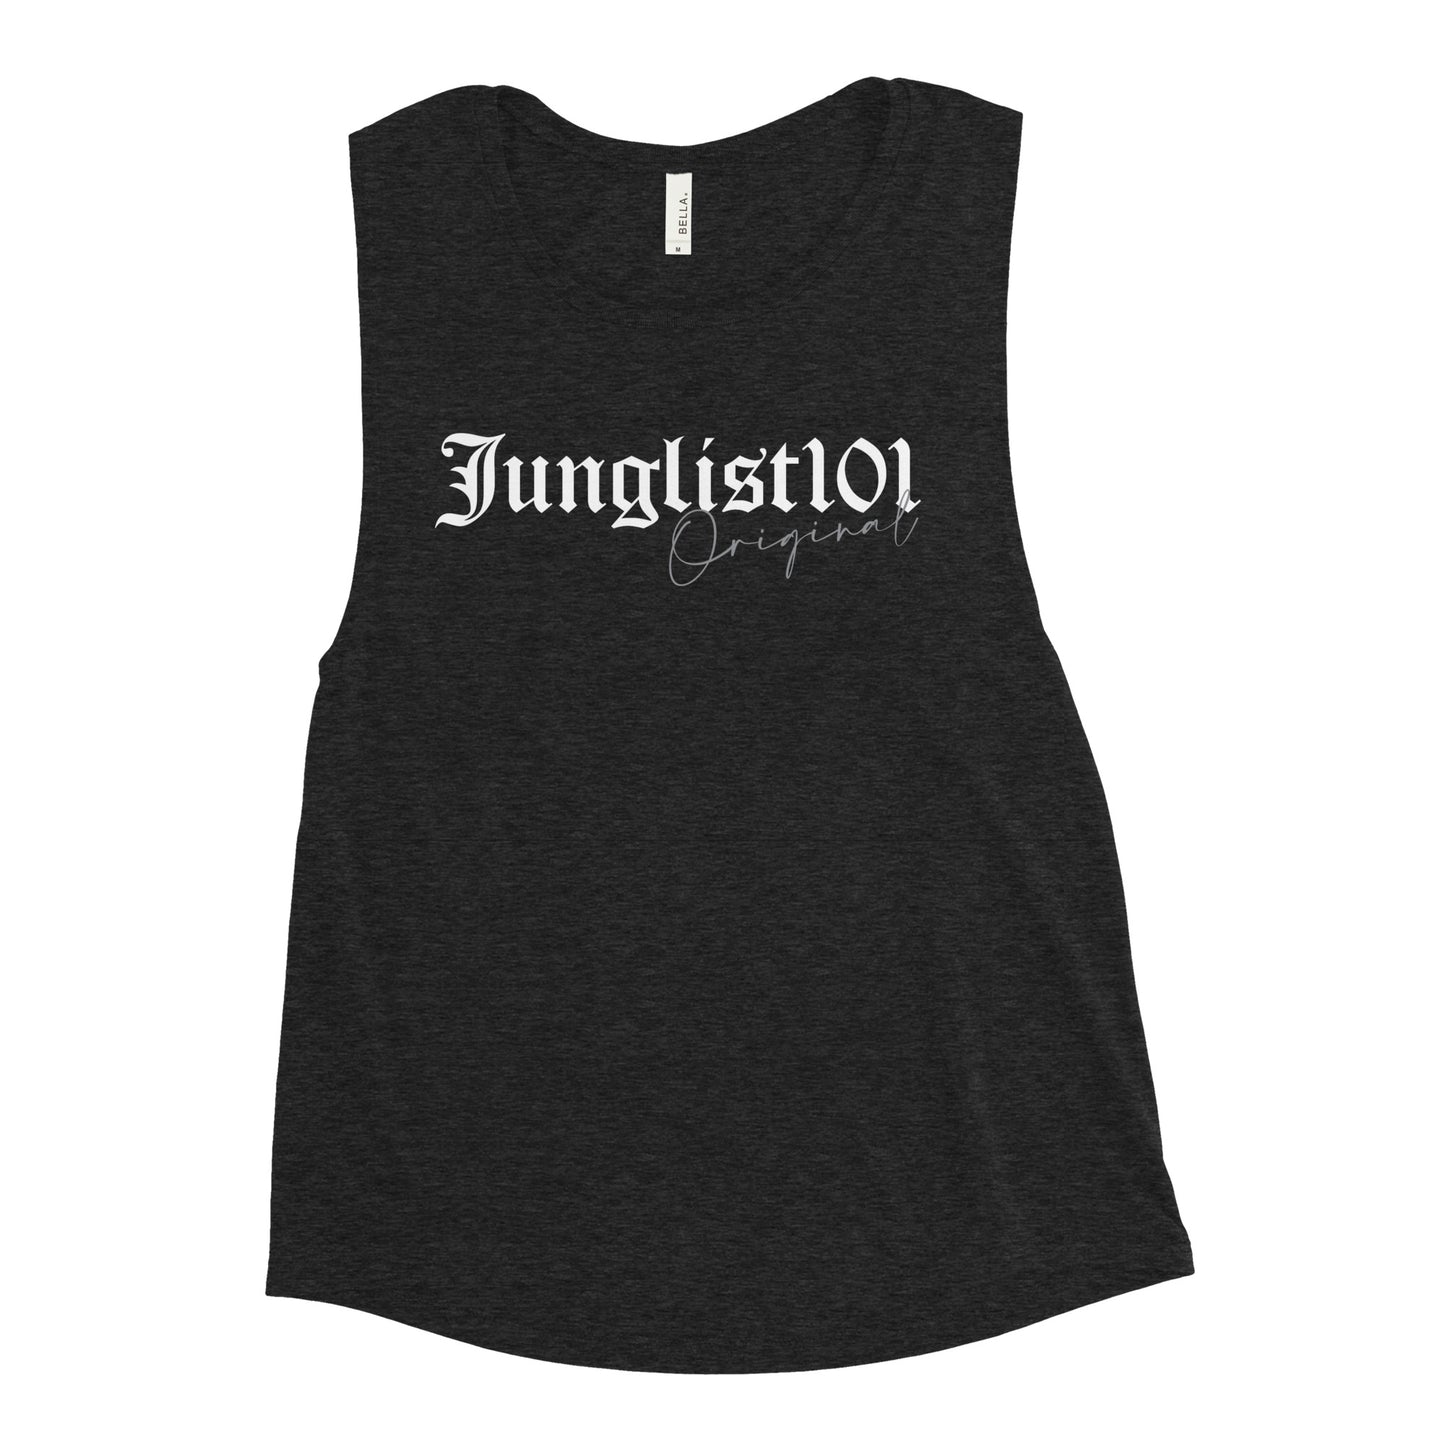 Junglist101 (v1) Ladies’ Muscle Tank (White Text)